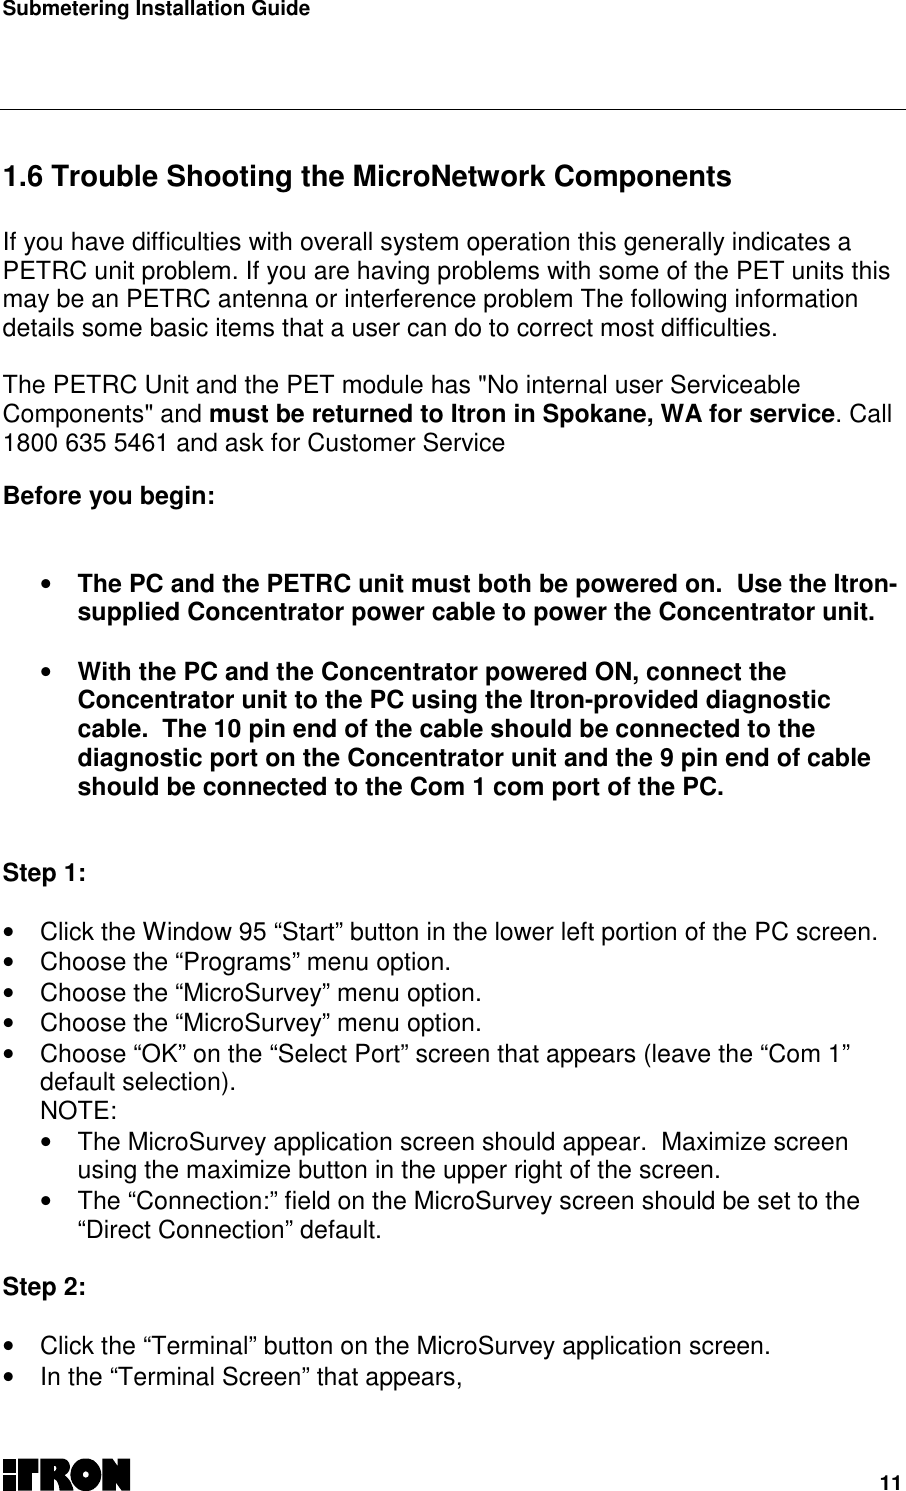 Submetering Installation Guide11   1.6 Trouble Shooting the MicroNetwork Components  If you have difficulties with overall system operation this generally indicates aPETRC unit problem. If you are having problems with some of the PET units thismay be an PETRC antenna or interference problem The following informationdetails some basic items that a user can do to correct most difficulties. The PETRC Unit and the PET module has &quot;No internal user ServiceableComponents&quot; and must be returned to Itron in Spokane, WA for service. Call1800 635 5461 and ask for Customer Service Before you begin: • The PC and the PETRC unit must both be powered on.  Use the Itron-supplied Concentrator power cable to power the Concentrator unit. • With the PC and the Concentrator powered ON, connect theConcentrator unit to the PC using the Itron-provided diagnosticcable.  The 10 pin end of the cable should be connected to thediagnostic port on the Concentrator unit and the 9 pin end of cableshould be connected to the Com 1 com port of the PC.Step 1:•  Click the Window 95 “Start” button in the lower left portion of the PC screen.•  Choose the “Programs” menu option.•  Choose the “MicroSurvey” menu option.•  Choose the “MicroSurvey” menu option.•  Choose “OK” on the “Select Port” screen that appears (leave the “Com 1”default selection).NOTE:•  The MicroSurvey application screen should appear.  Maximize screenusing the maximize button in the upper right of the screen.•  The “Connection:” field on the MicroSurvey screen should be set to the“Direct Connection” default.Step 2:•  Click the “Terminal” button on the MicroSurvey application screen.•  In the “Terminal Screen” that appears,